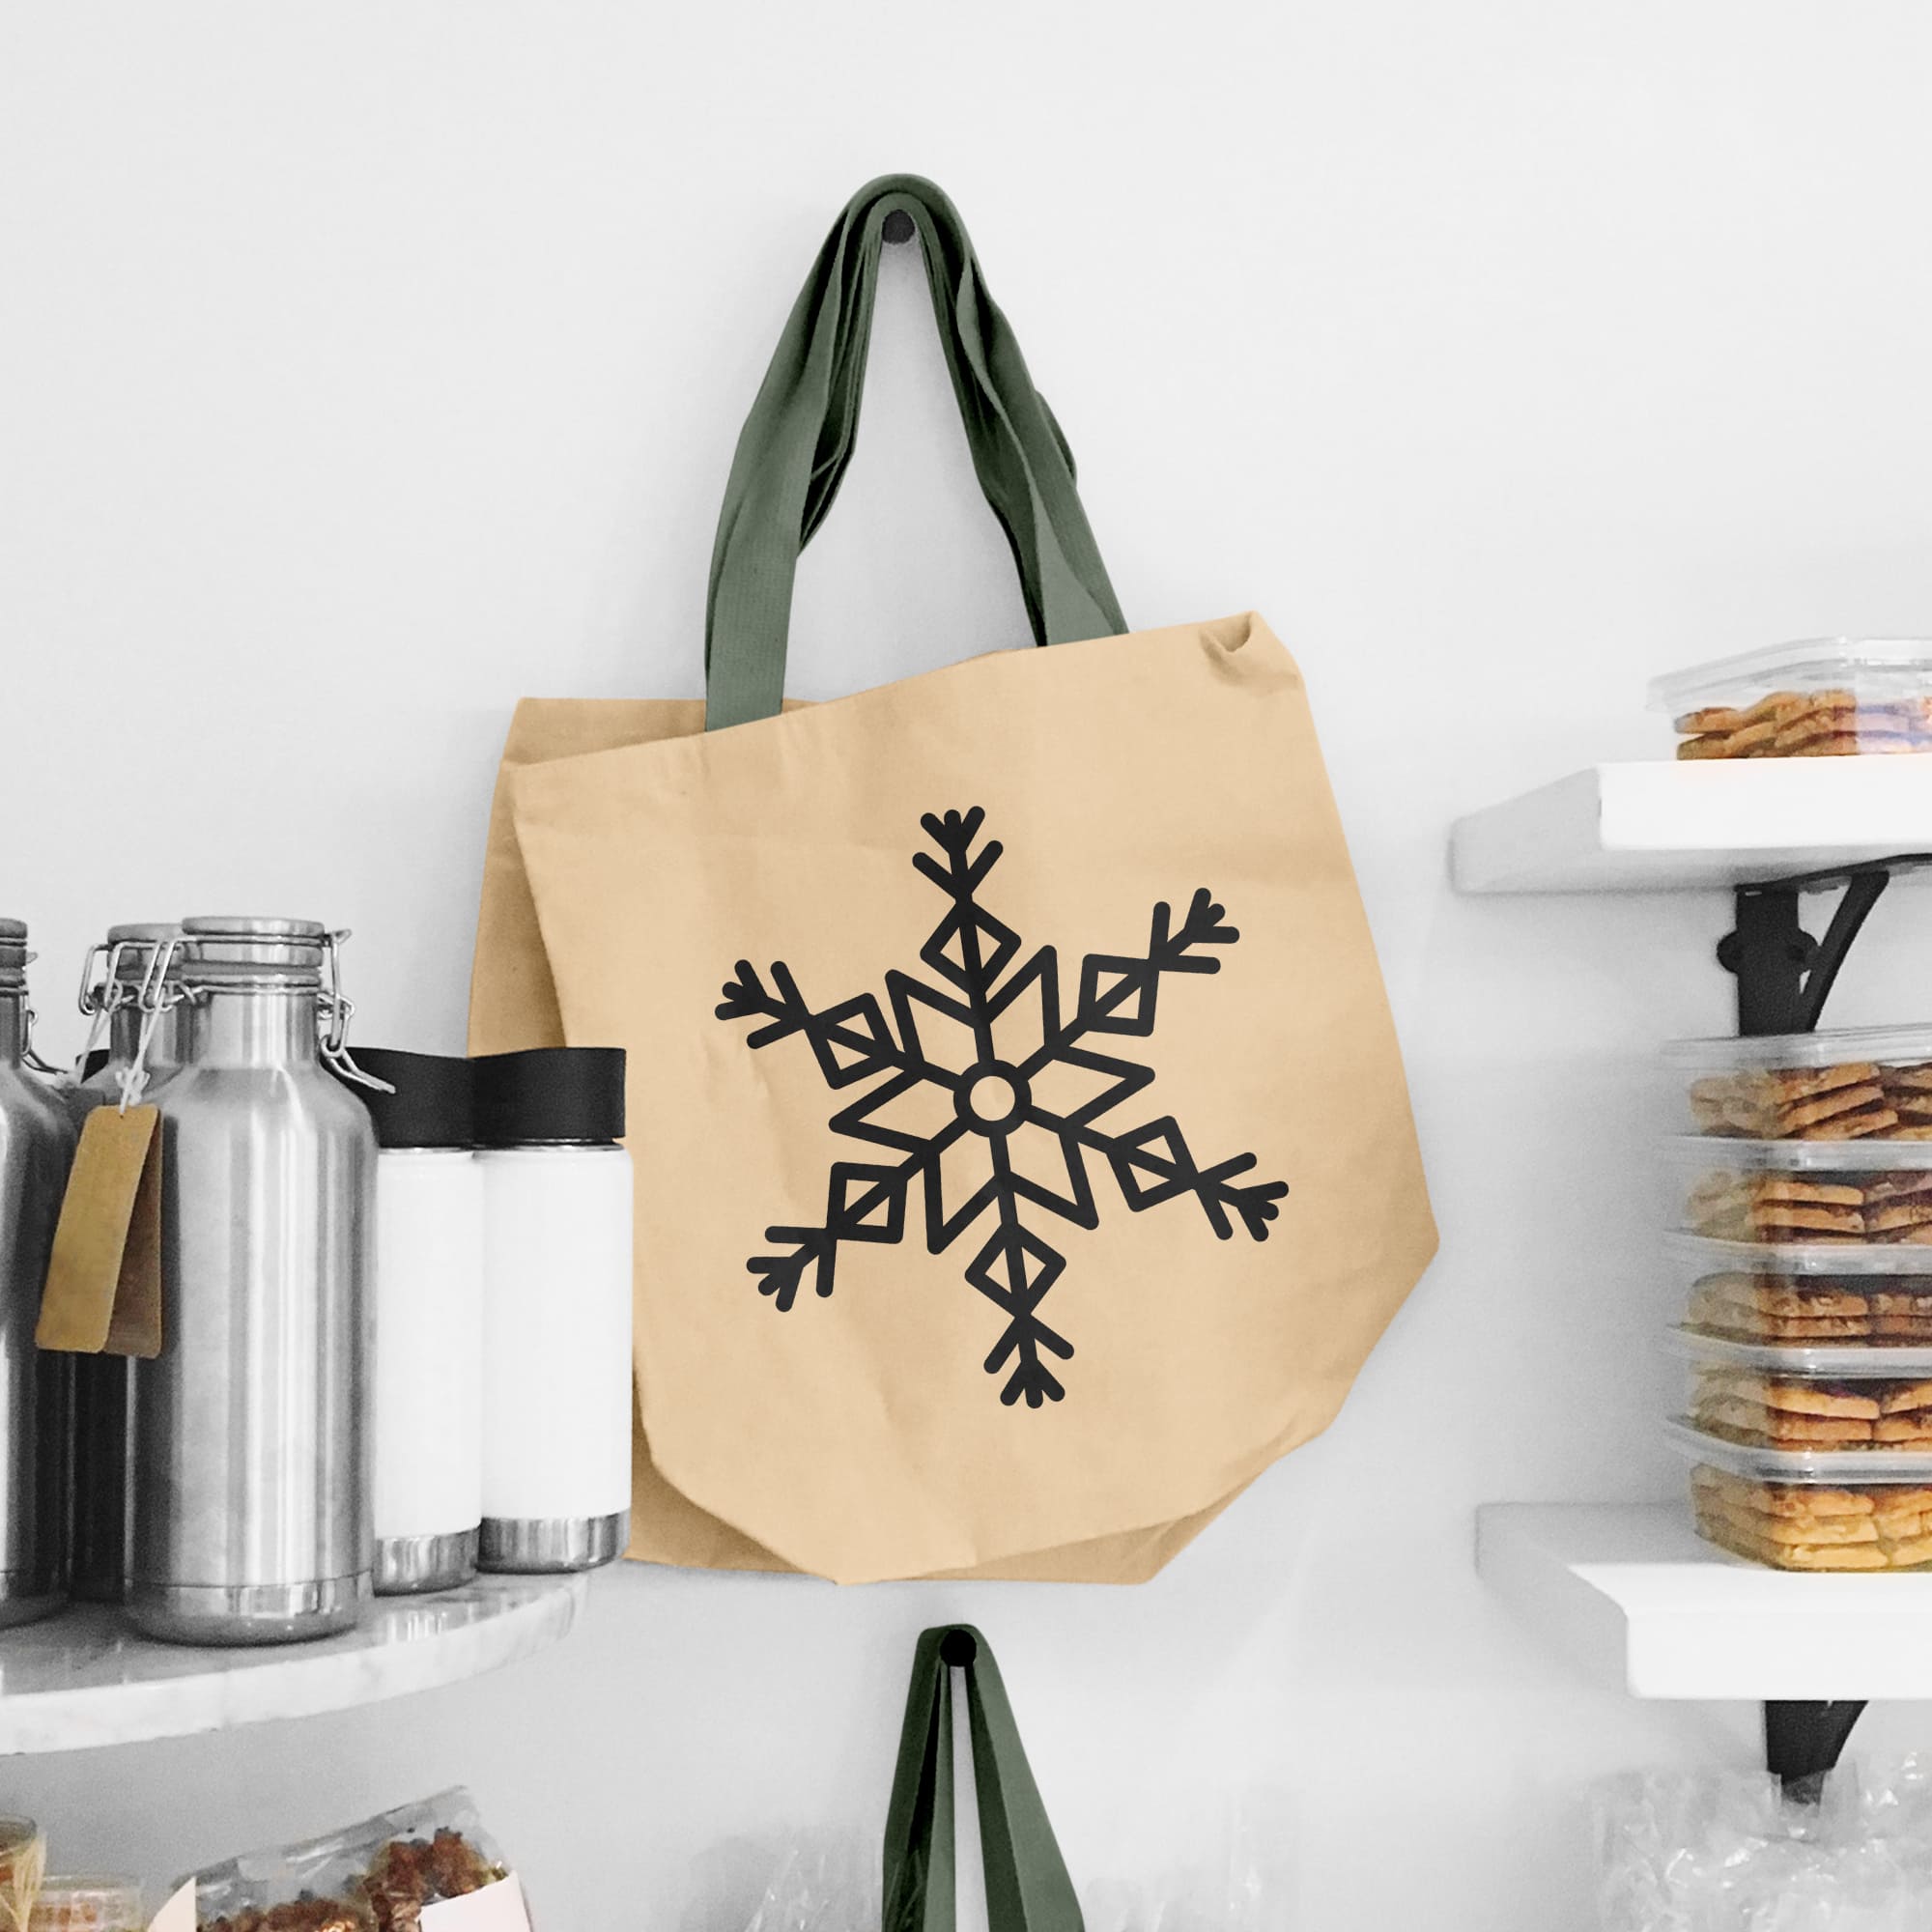 Cute shopping bag with snowflake.